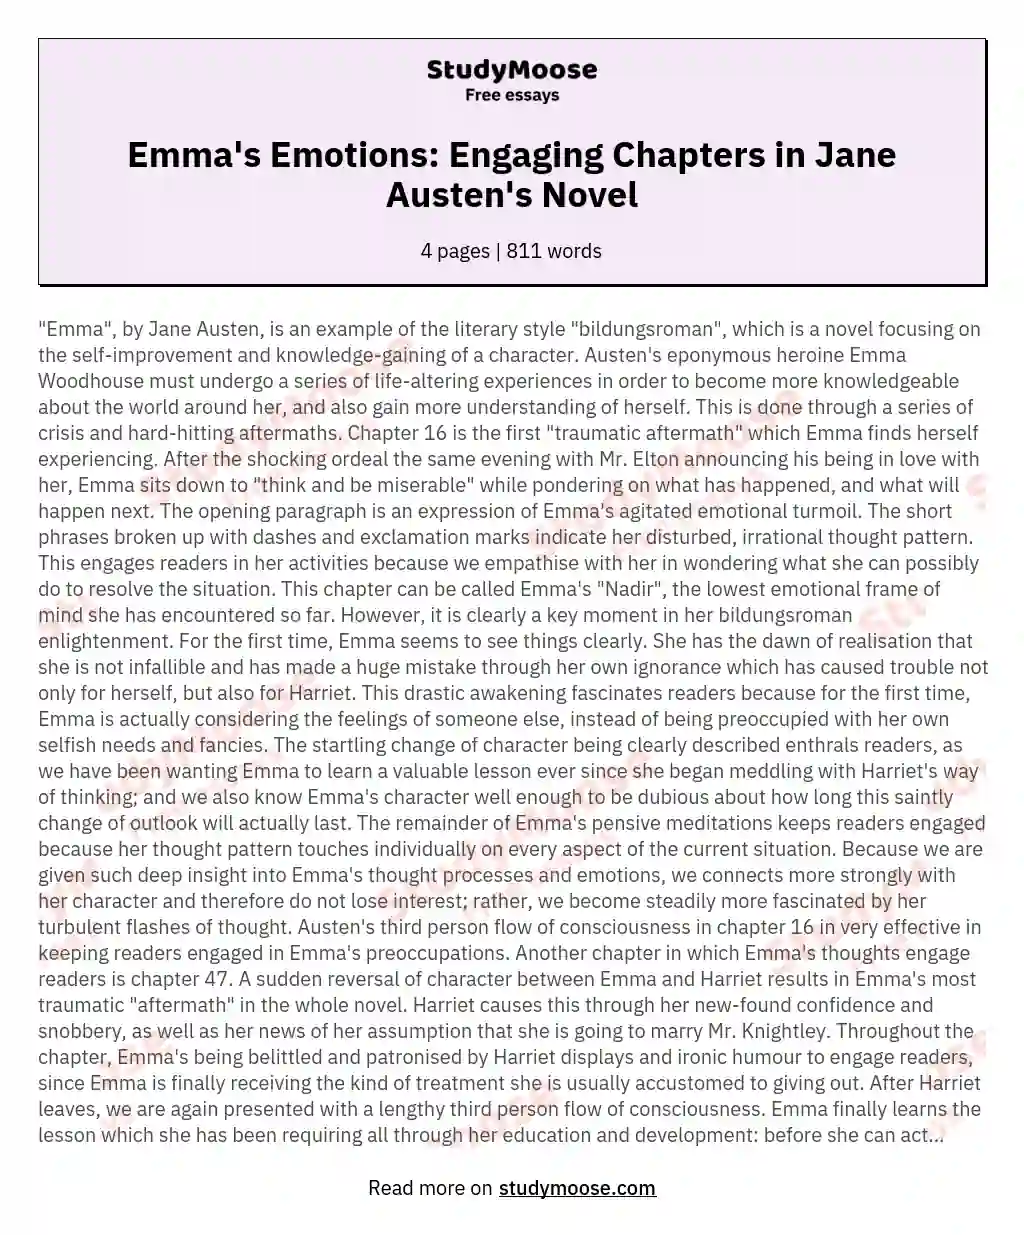 Discuss two chapters in which Emma's emotions and thoughts are used to engage readers